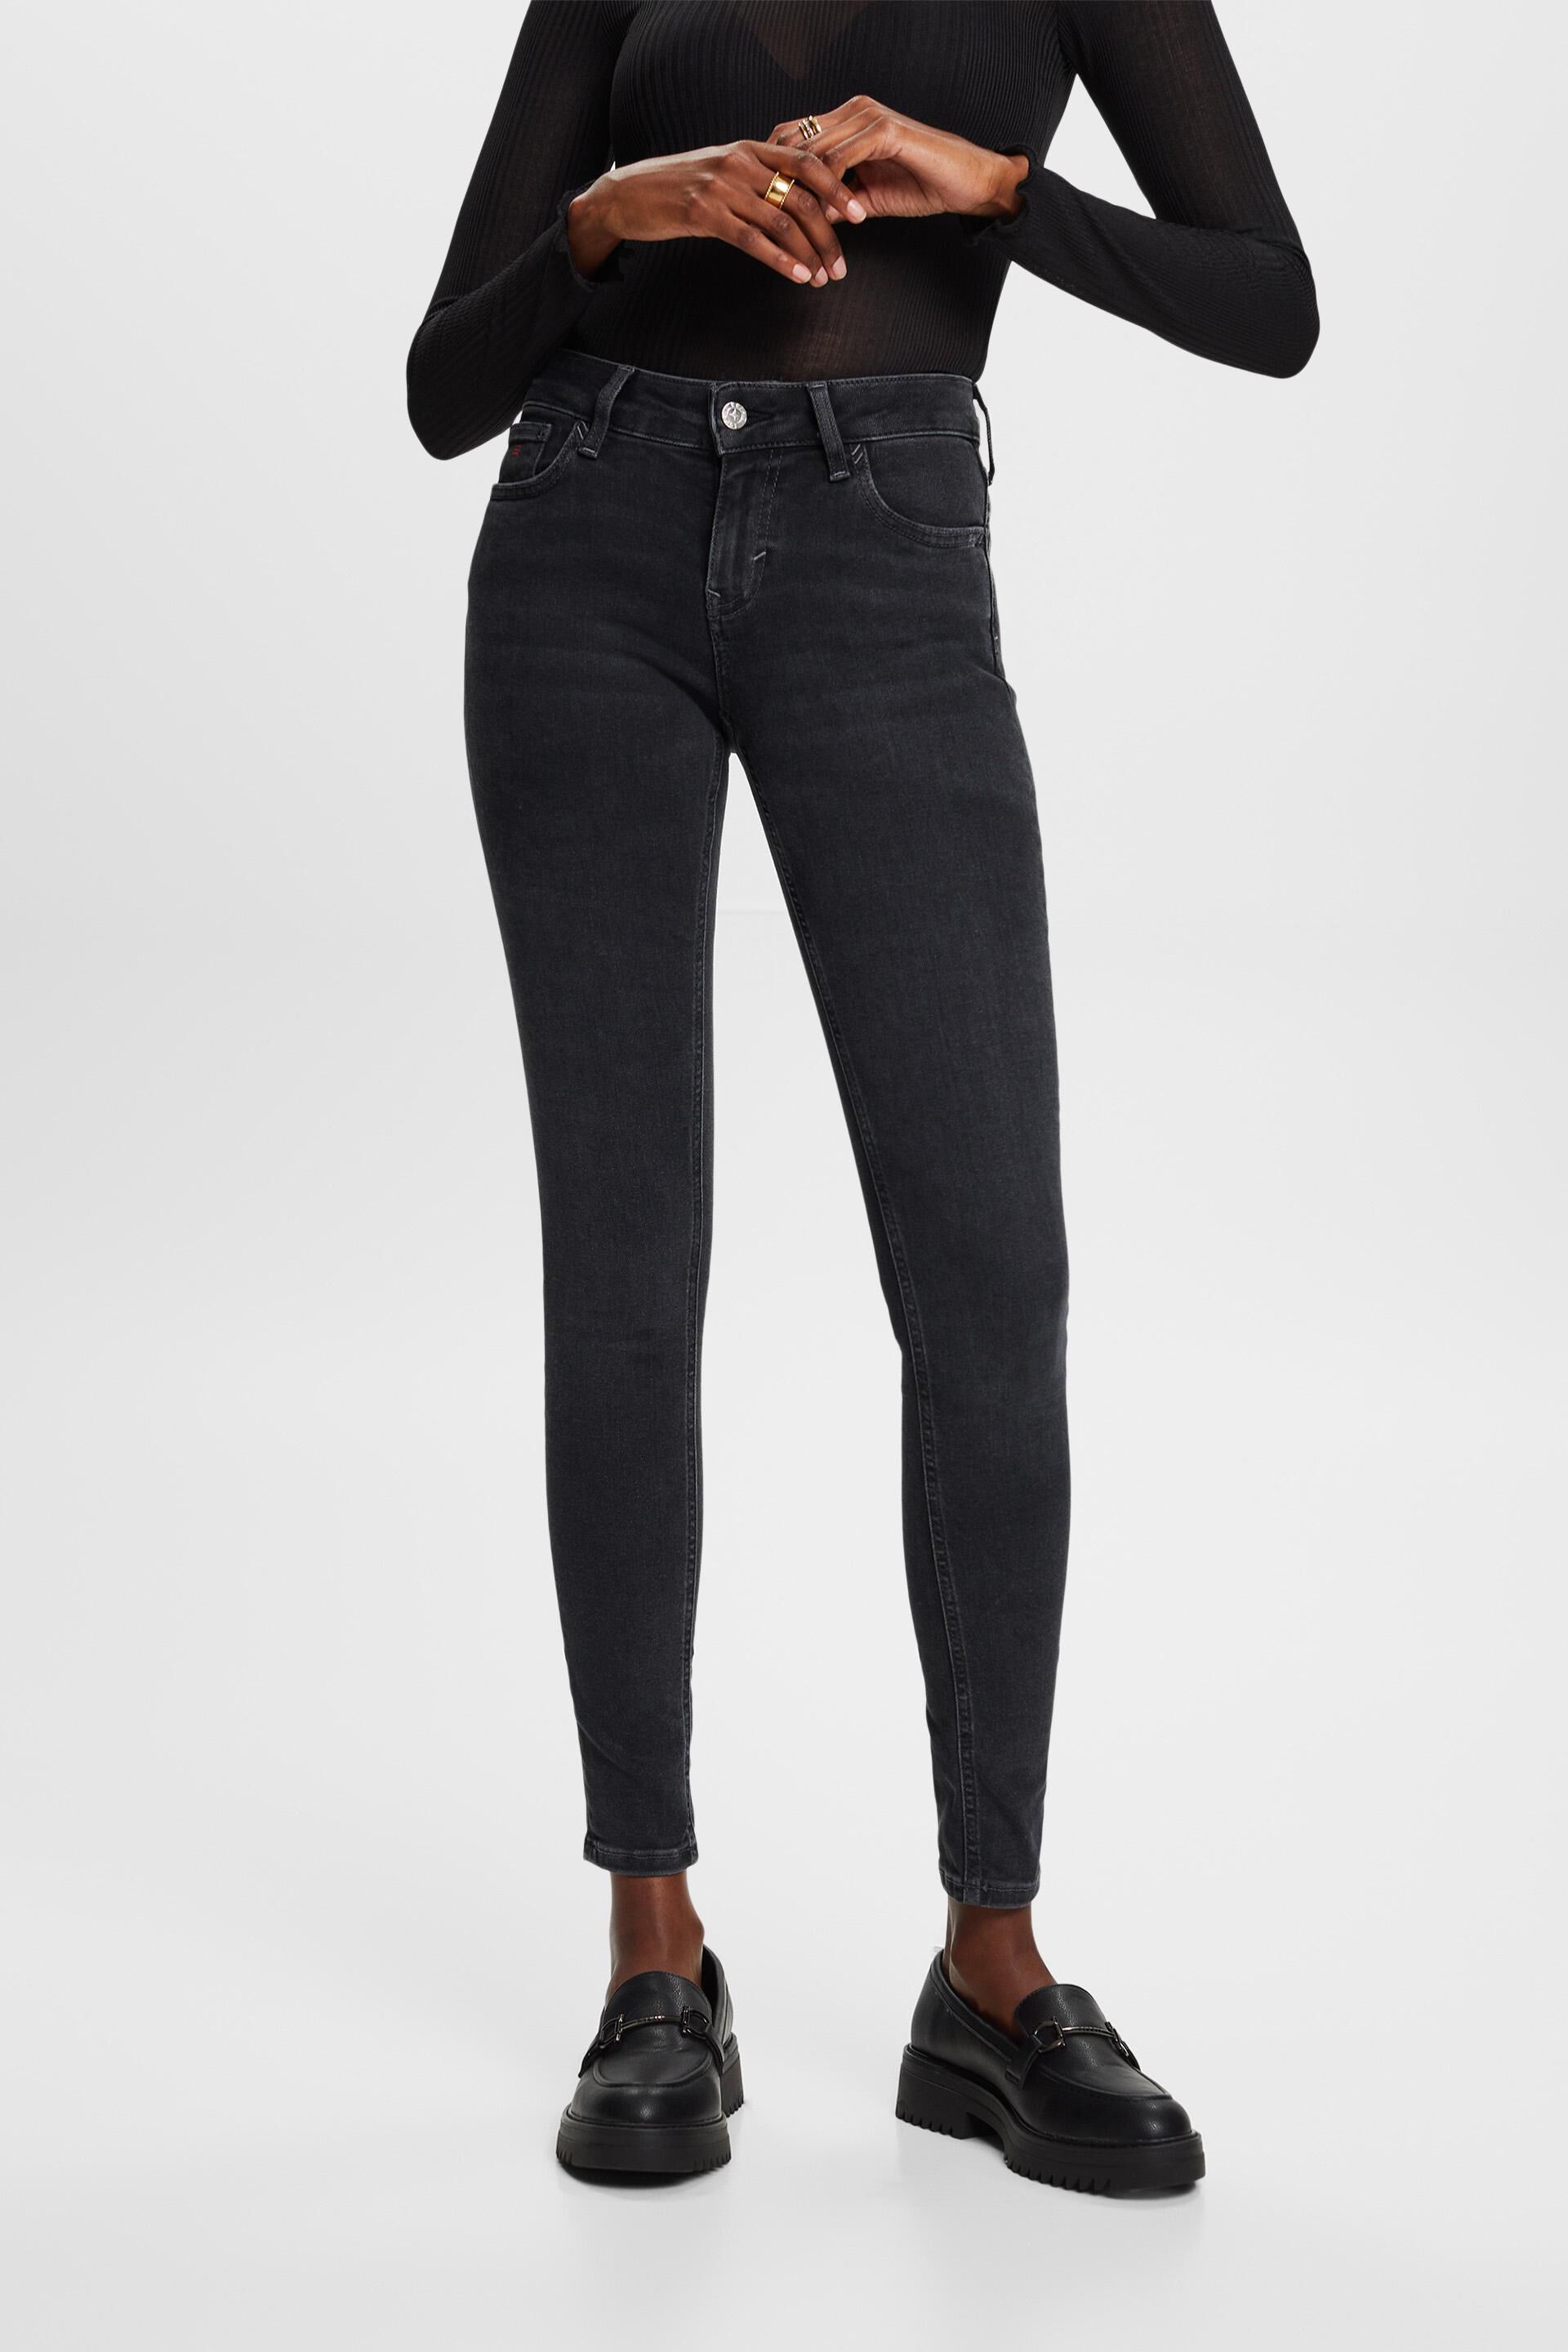 Esprit Recycled: stretch jeans fit mid-rise skinny